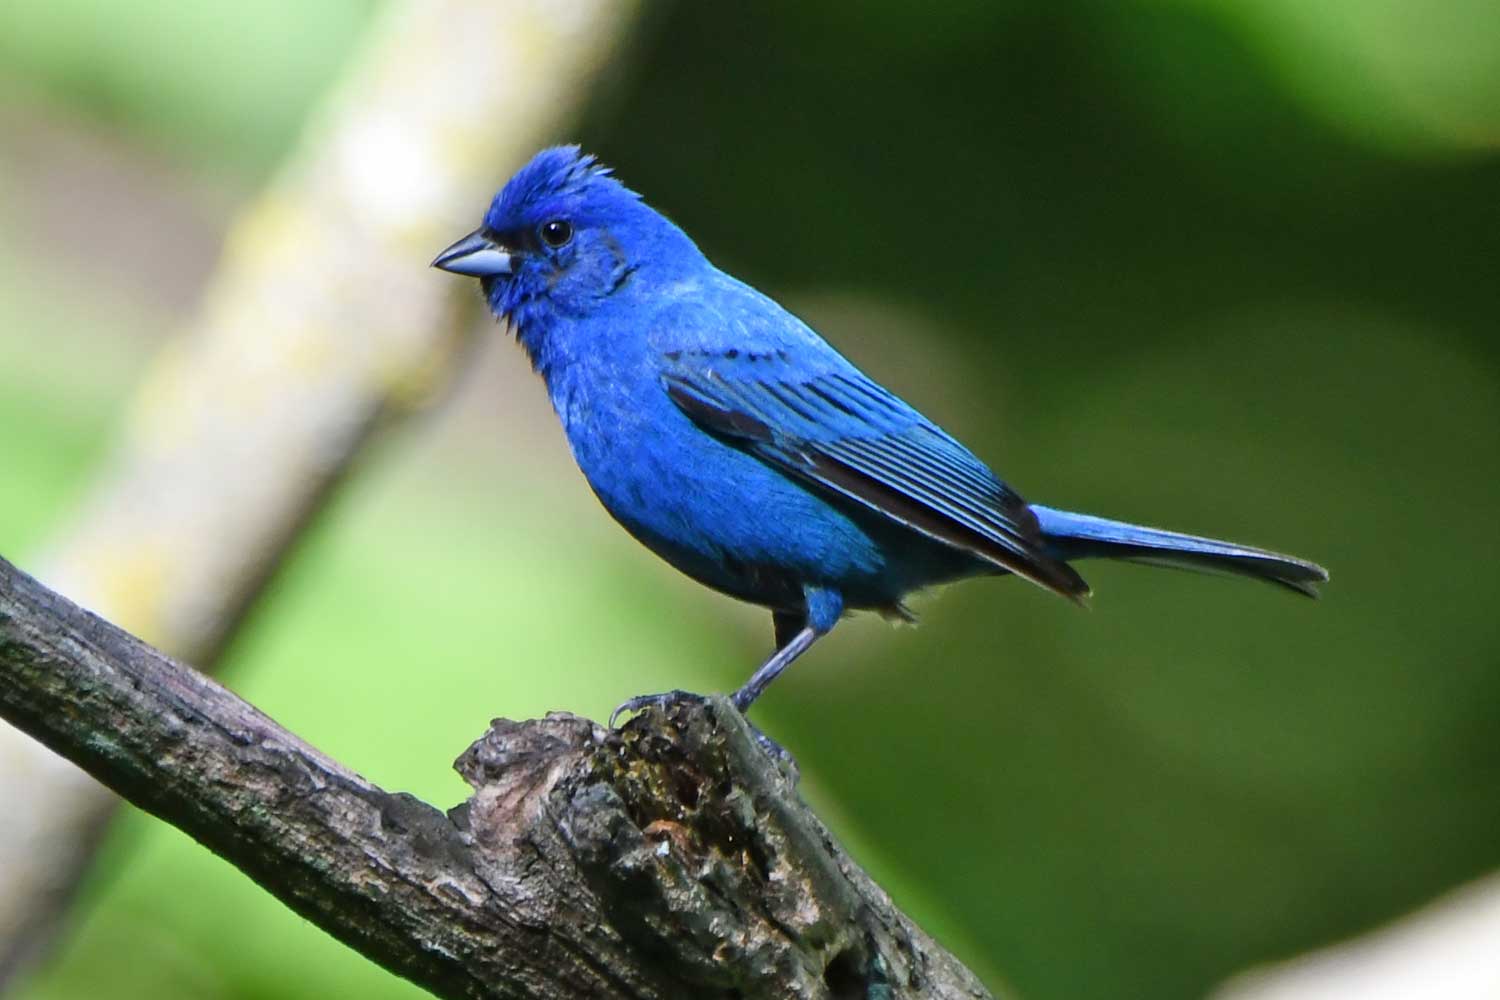 Indigo bunting perched on a branch.